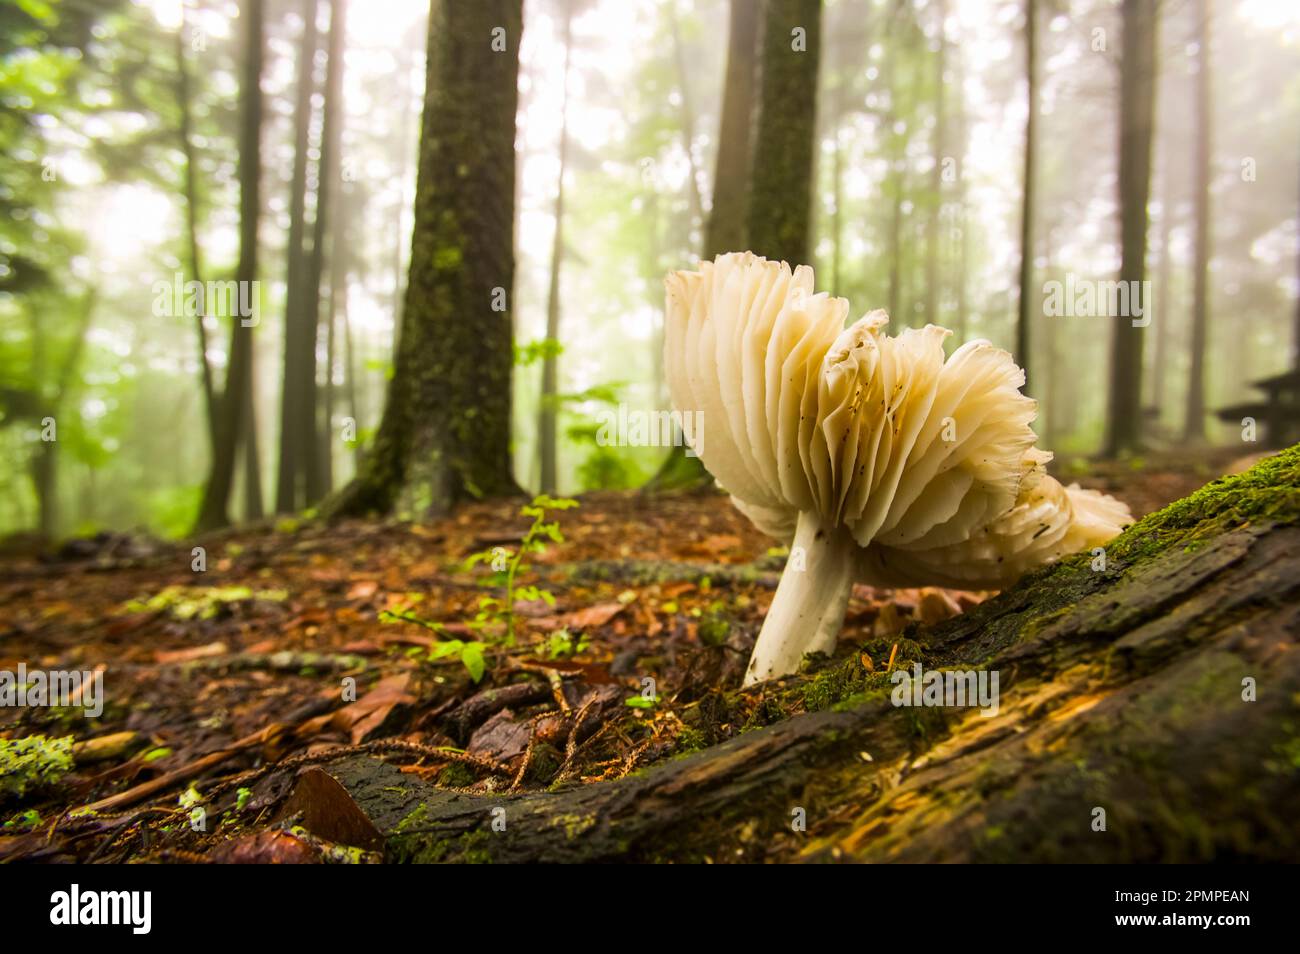 Mushroom growing on the forest floor at the Balsam Mountain picnic area in Great Smoky Mountains National Park, Tennessee, USA Stock Photo